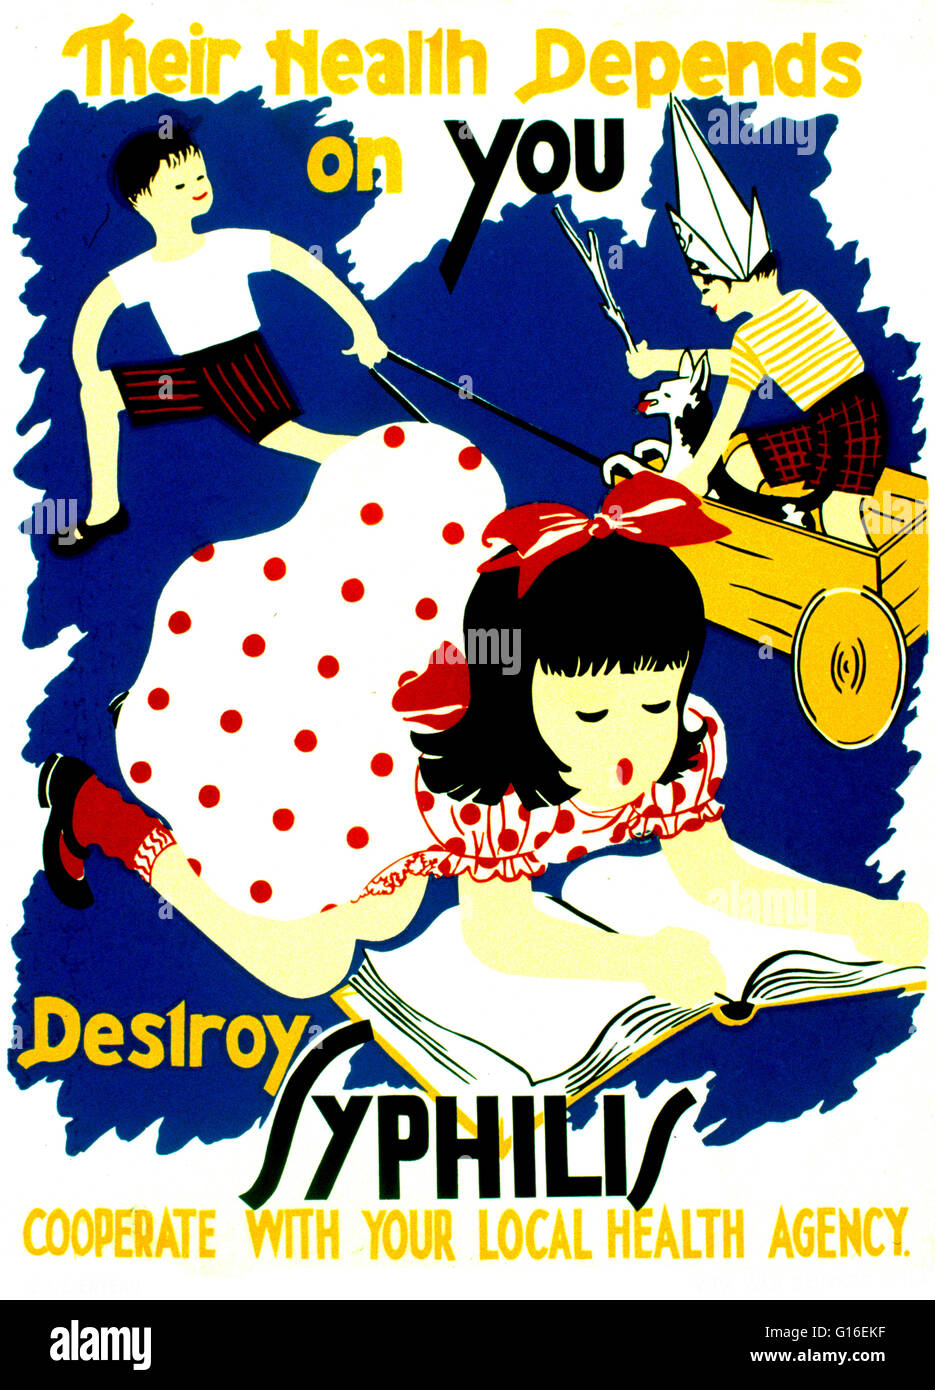 Entitled: "Their health depends on you. Destroy syphilis". Poster promoting eradication of syphilis, showing children playing and reading. The Federal Art Project (FAP) was the visual arts arm of the Great Depression era New Deal Works Progress Administra Stock Photo